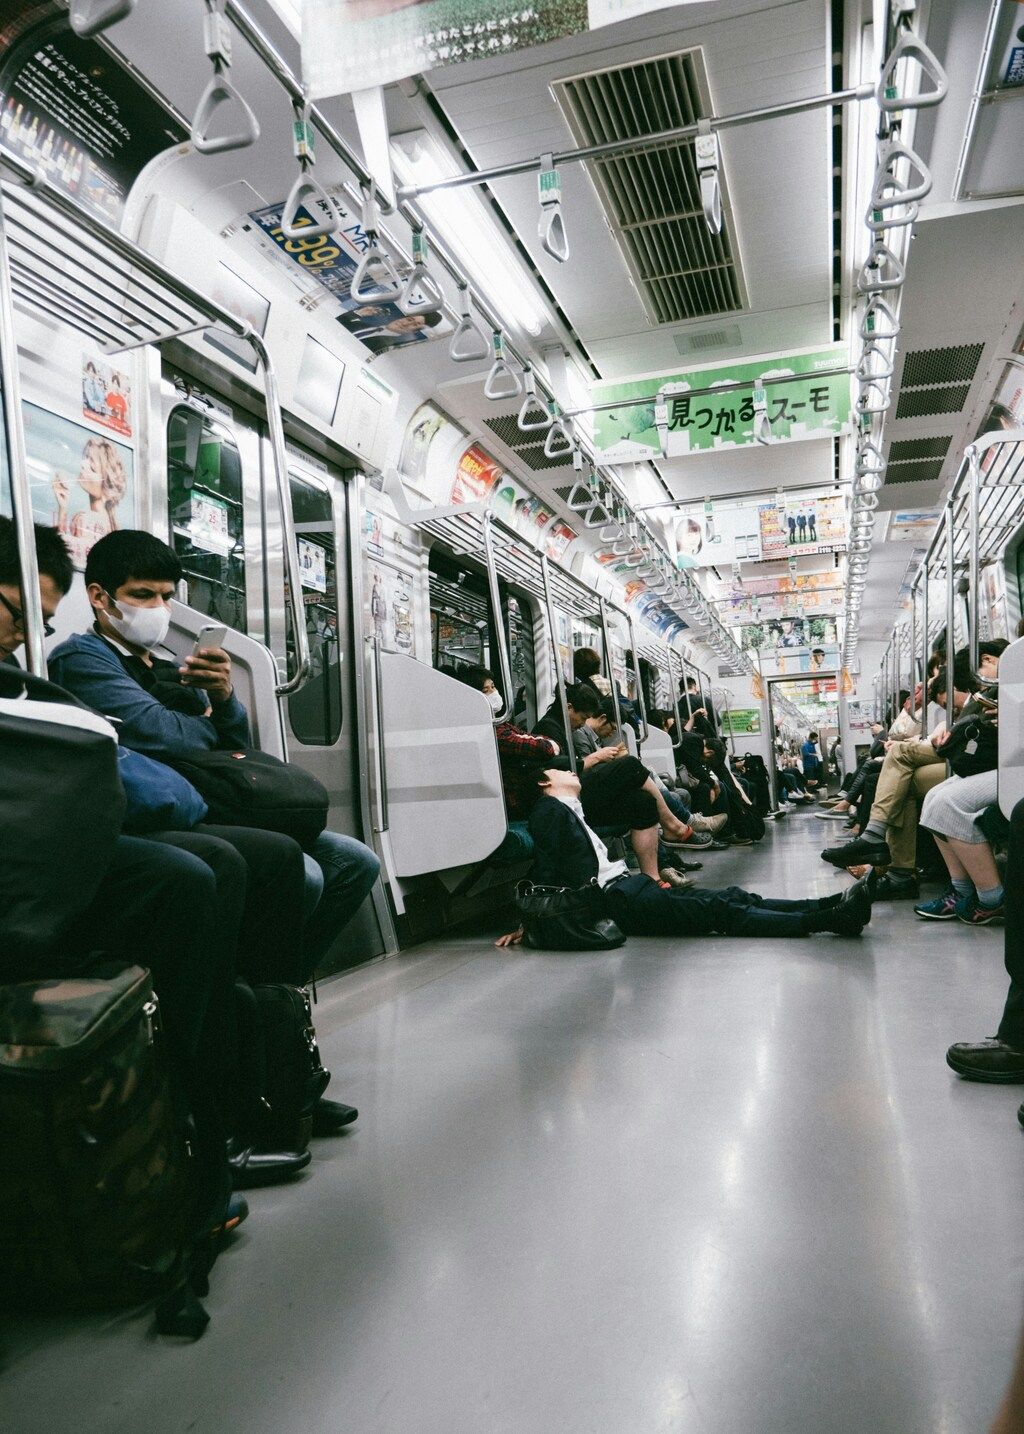 Passengers with face masks sitting and standing inside a crowded Japanese subway train
